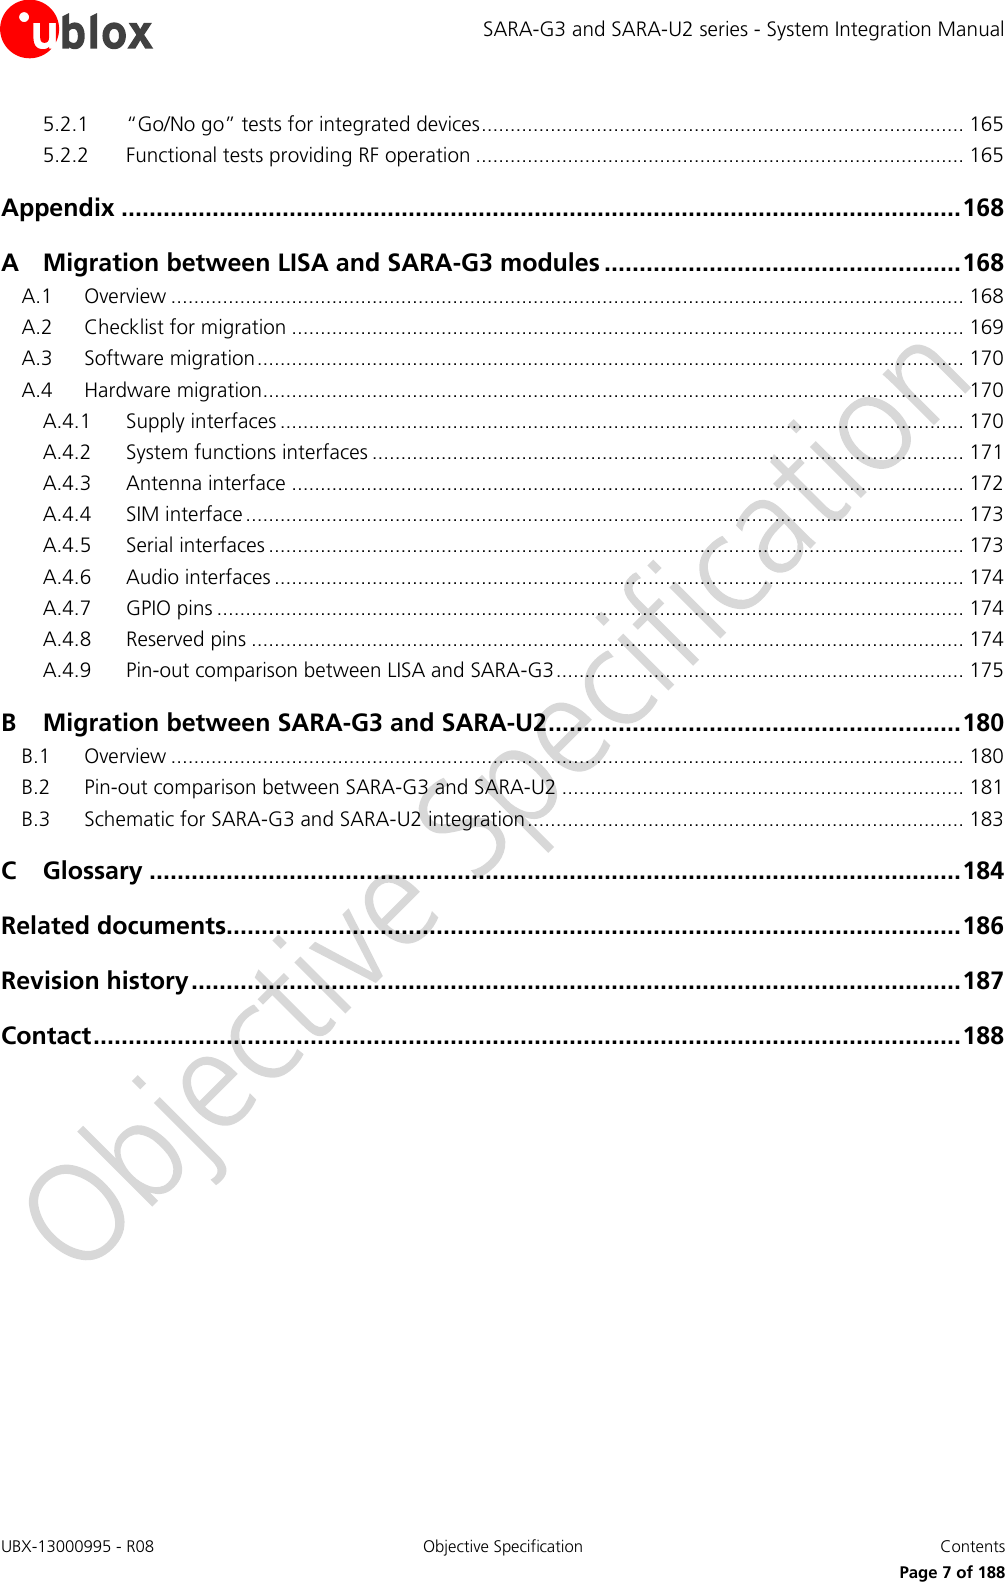 SARA-G3 and SARA-U2 series - System Integration Manual UBX-13000995 - R08  Objective Specification  Contents     Page 7 of 188 5.2.1 “Go/No go” tests for integrated devices .................................................................................... 165 5.2.2 Functional tests providing RF operation ..................................................................................... 165 Appendix ........................................................................................................................ 168 A Migration between LISA and SARA-G3 modules ................................................... 168 A.1 Overview .......................................................................................................................................... 168 A.2 Checklist for migration ..................................................................................................................... 169 A.3 Software migration ........................................................................................................................... 170 A.4 Hardware migration.......................................................................................................................... 170 A.4.1 Supply interfaces ....................................................................................................................... 170 A.4.2 System functions interfaces ....................................................................................................... 171 A.4.3 Antenna interface ..................................................................................................................... 172 A.4.4 SIM interface ............................................................................................................................. 173 A.4.5 Serial interfaces ......................................................................................................................... 173 A.4.6 Audio interfaces ........................................................................................................................ 174 A.4.7 GPIO pins .................................................................................................................................. 174 A.4.8 Reserved pins ............................................................................................................................ 174 A.4.9 Pin-out comparison between LISA and SARA-G3 ....................................................................... 175 B Migration between SARA-G3 and SARA-U2 ........................................................... 180 B.1 Overview .......................................................................................................................................... 180 B.2 Pin-out comparison between SARA-G3 and SARA-U2 ...................................................................... 181 B.3 Schematic for SARA-G3 and SARA-U2 integration ............................................................................ 183 C Glossary .................................................................................................................... 184 Related documents......................................................................................................... 186 Revision history .............................................................................................................. 187 Contact ............................................................................................................................ 188  